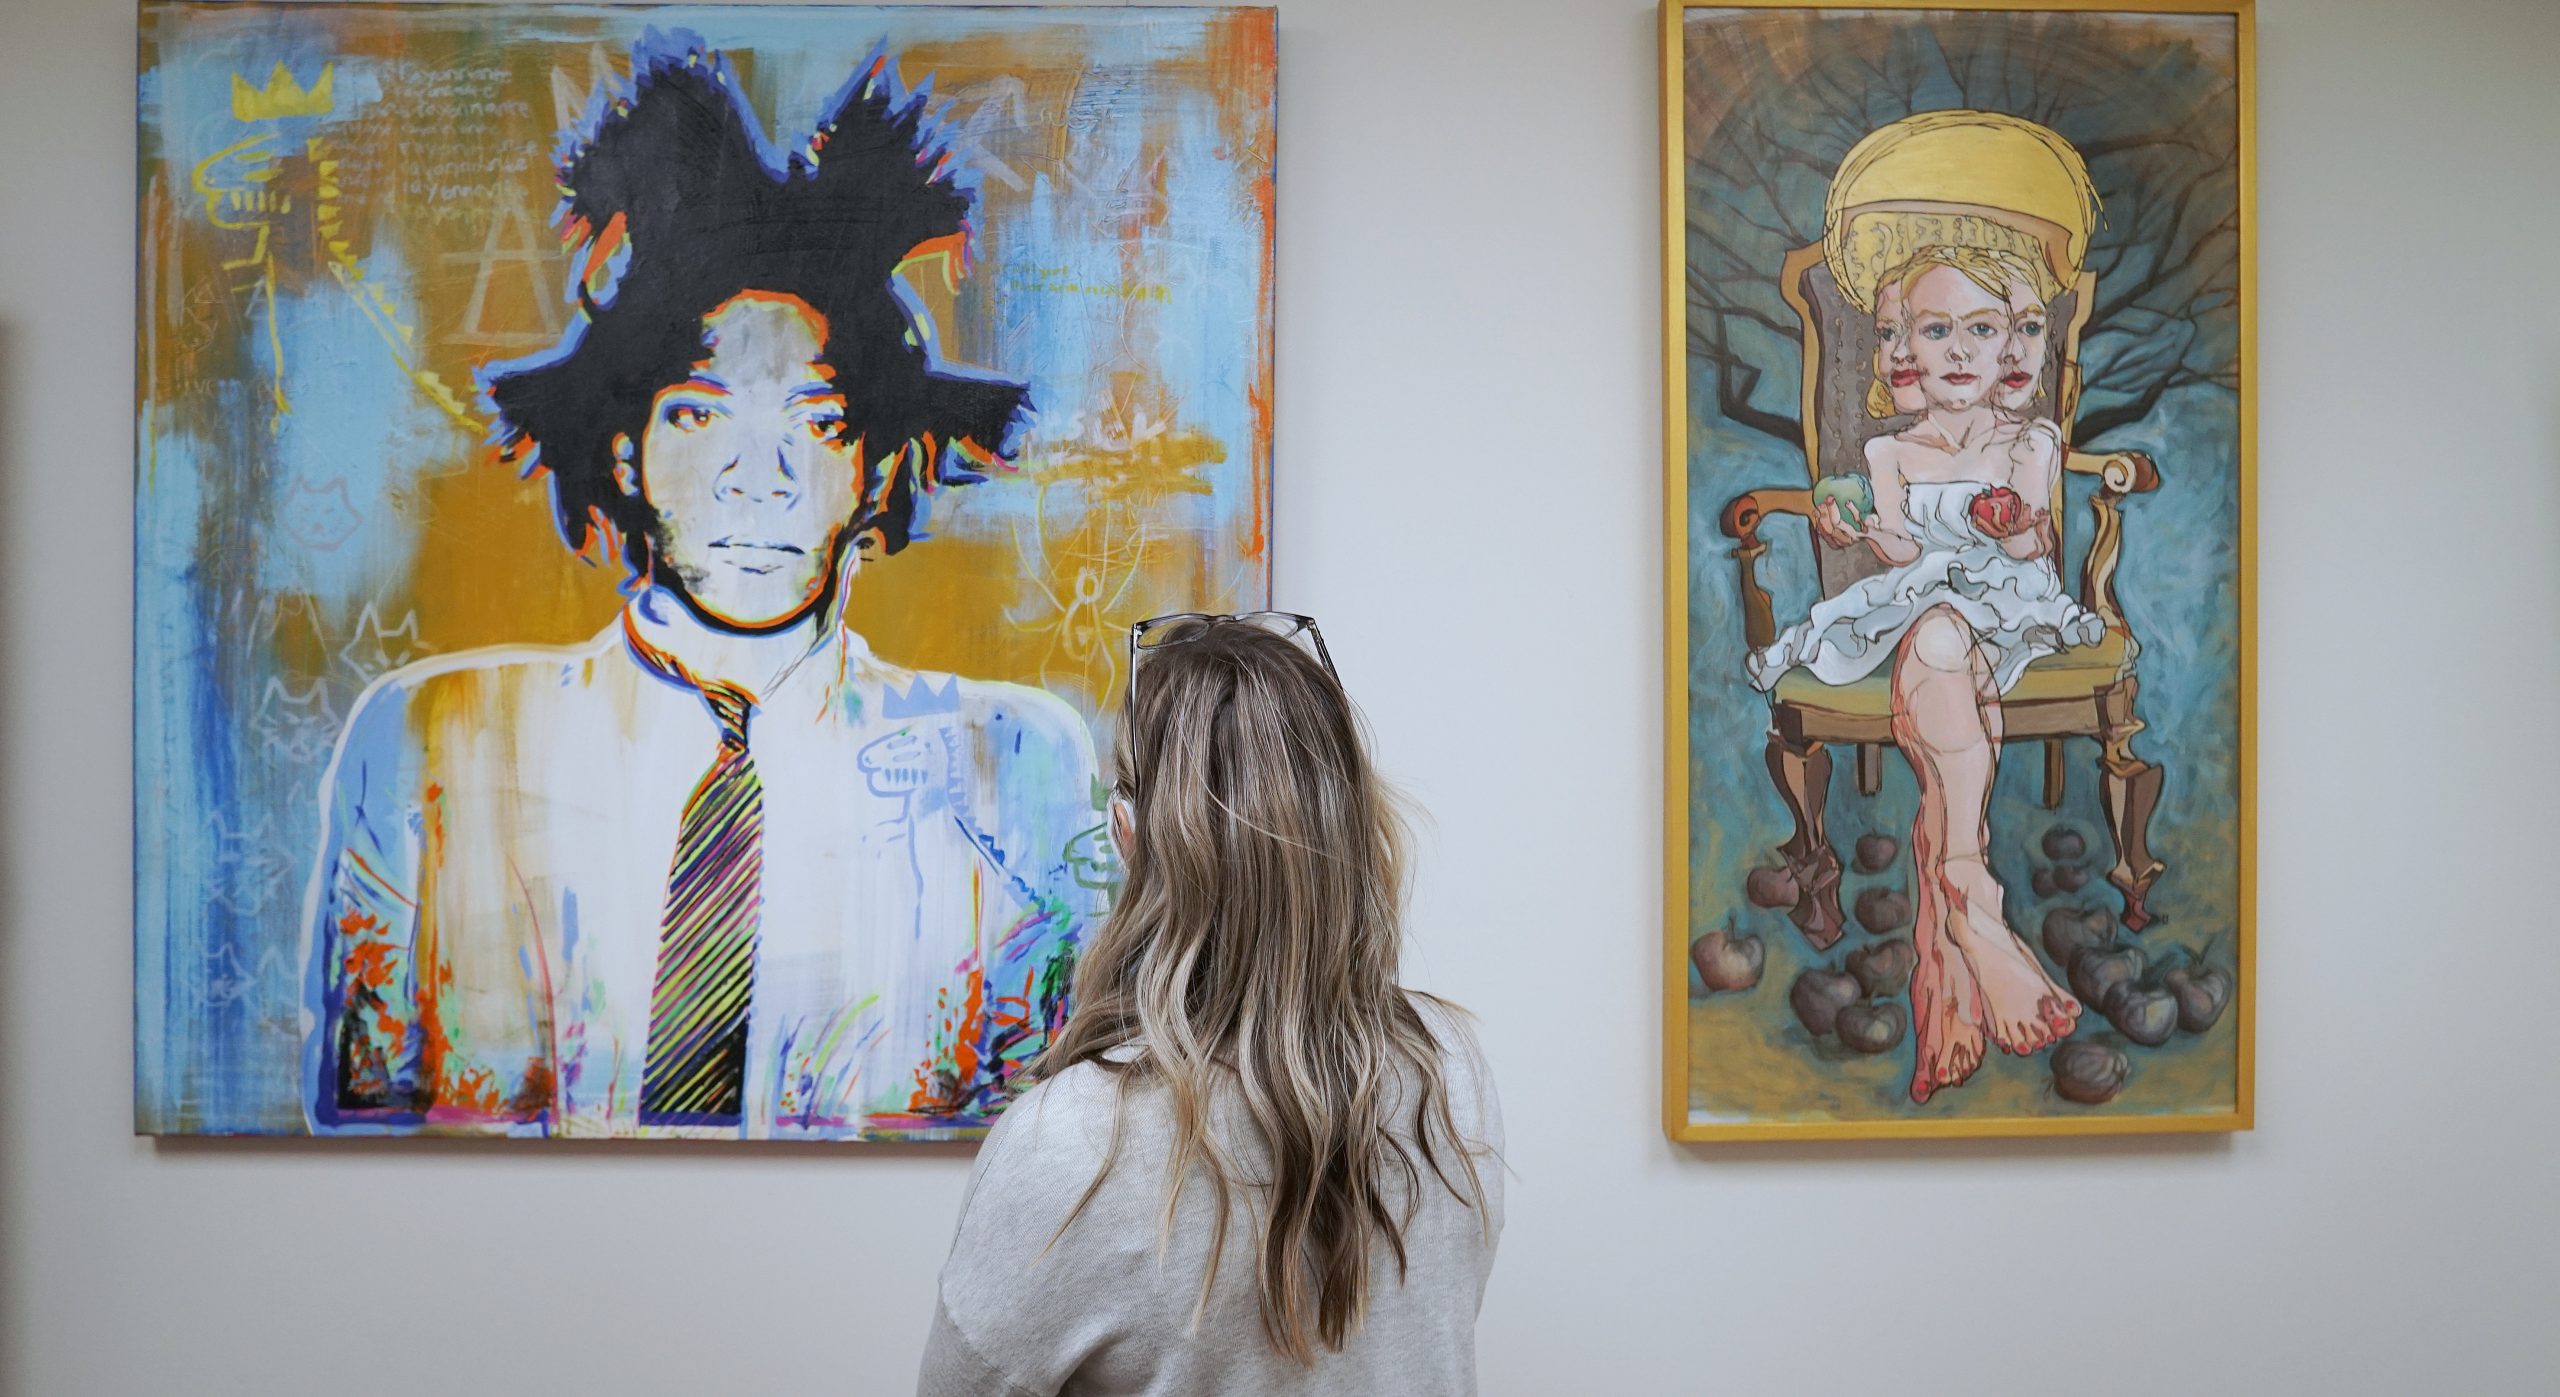 A White woman stands in front of a painting with a person with blues and yellows